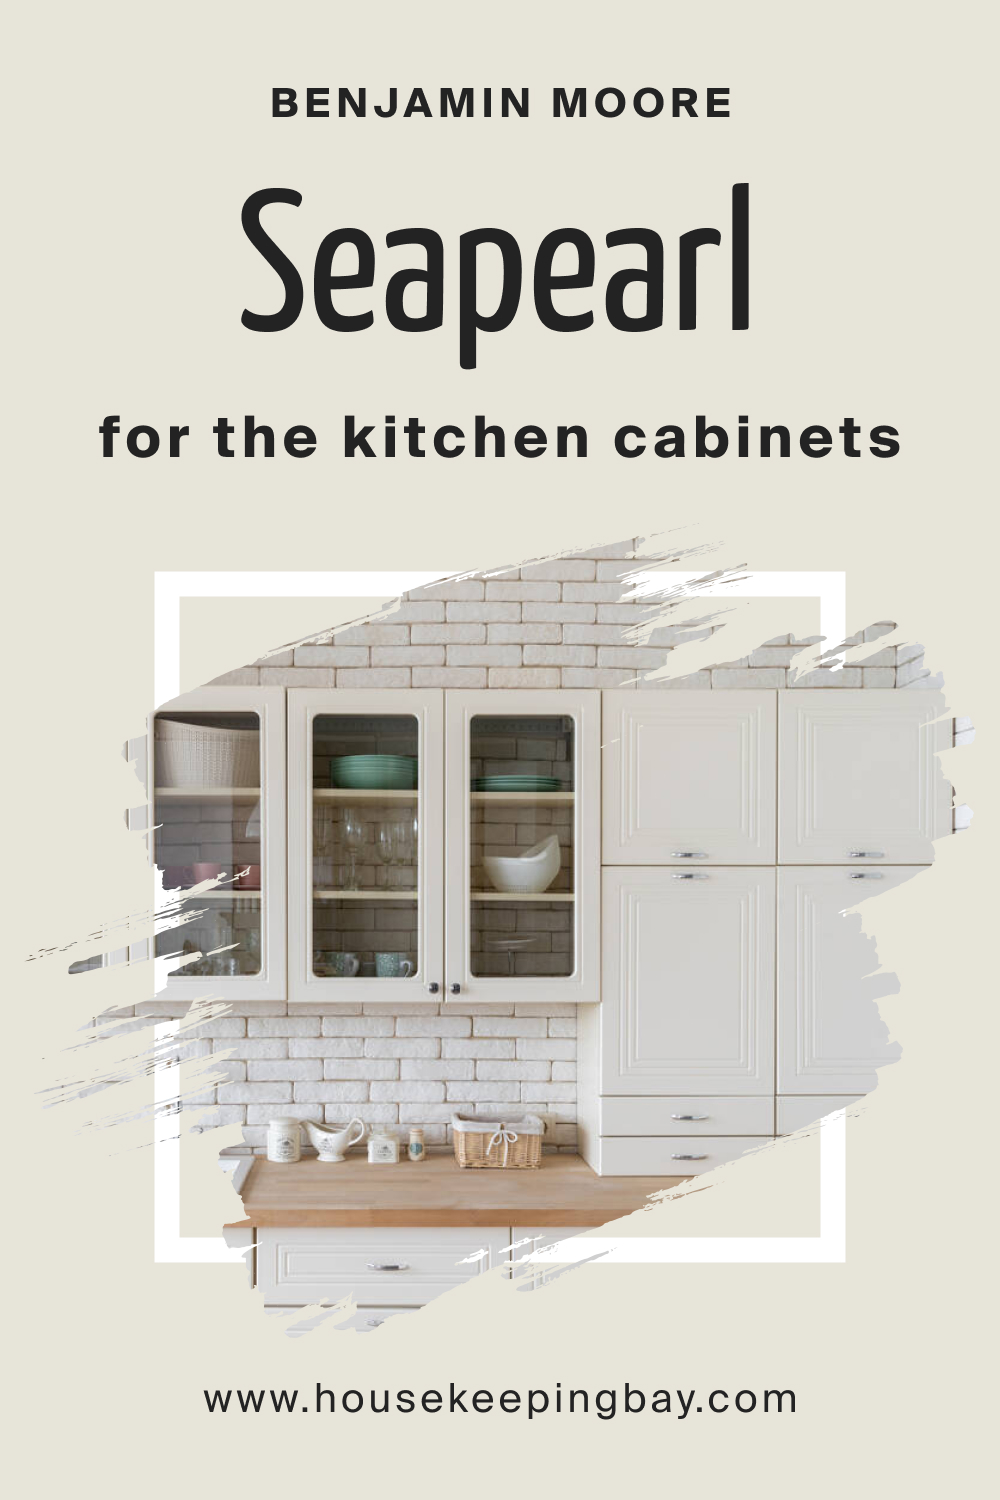 Benjamin Moore. Seapearl OC 19 for the KitchenKitchen Cabinets